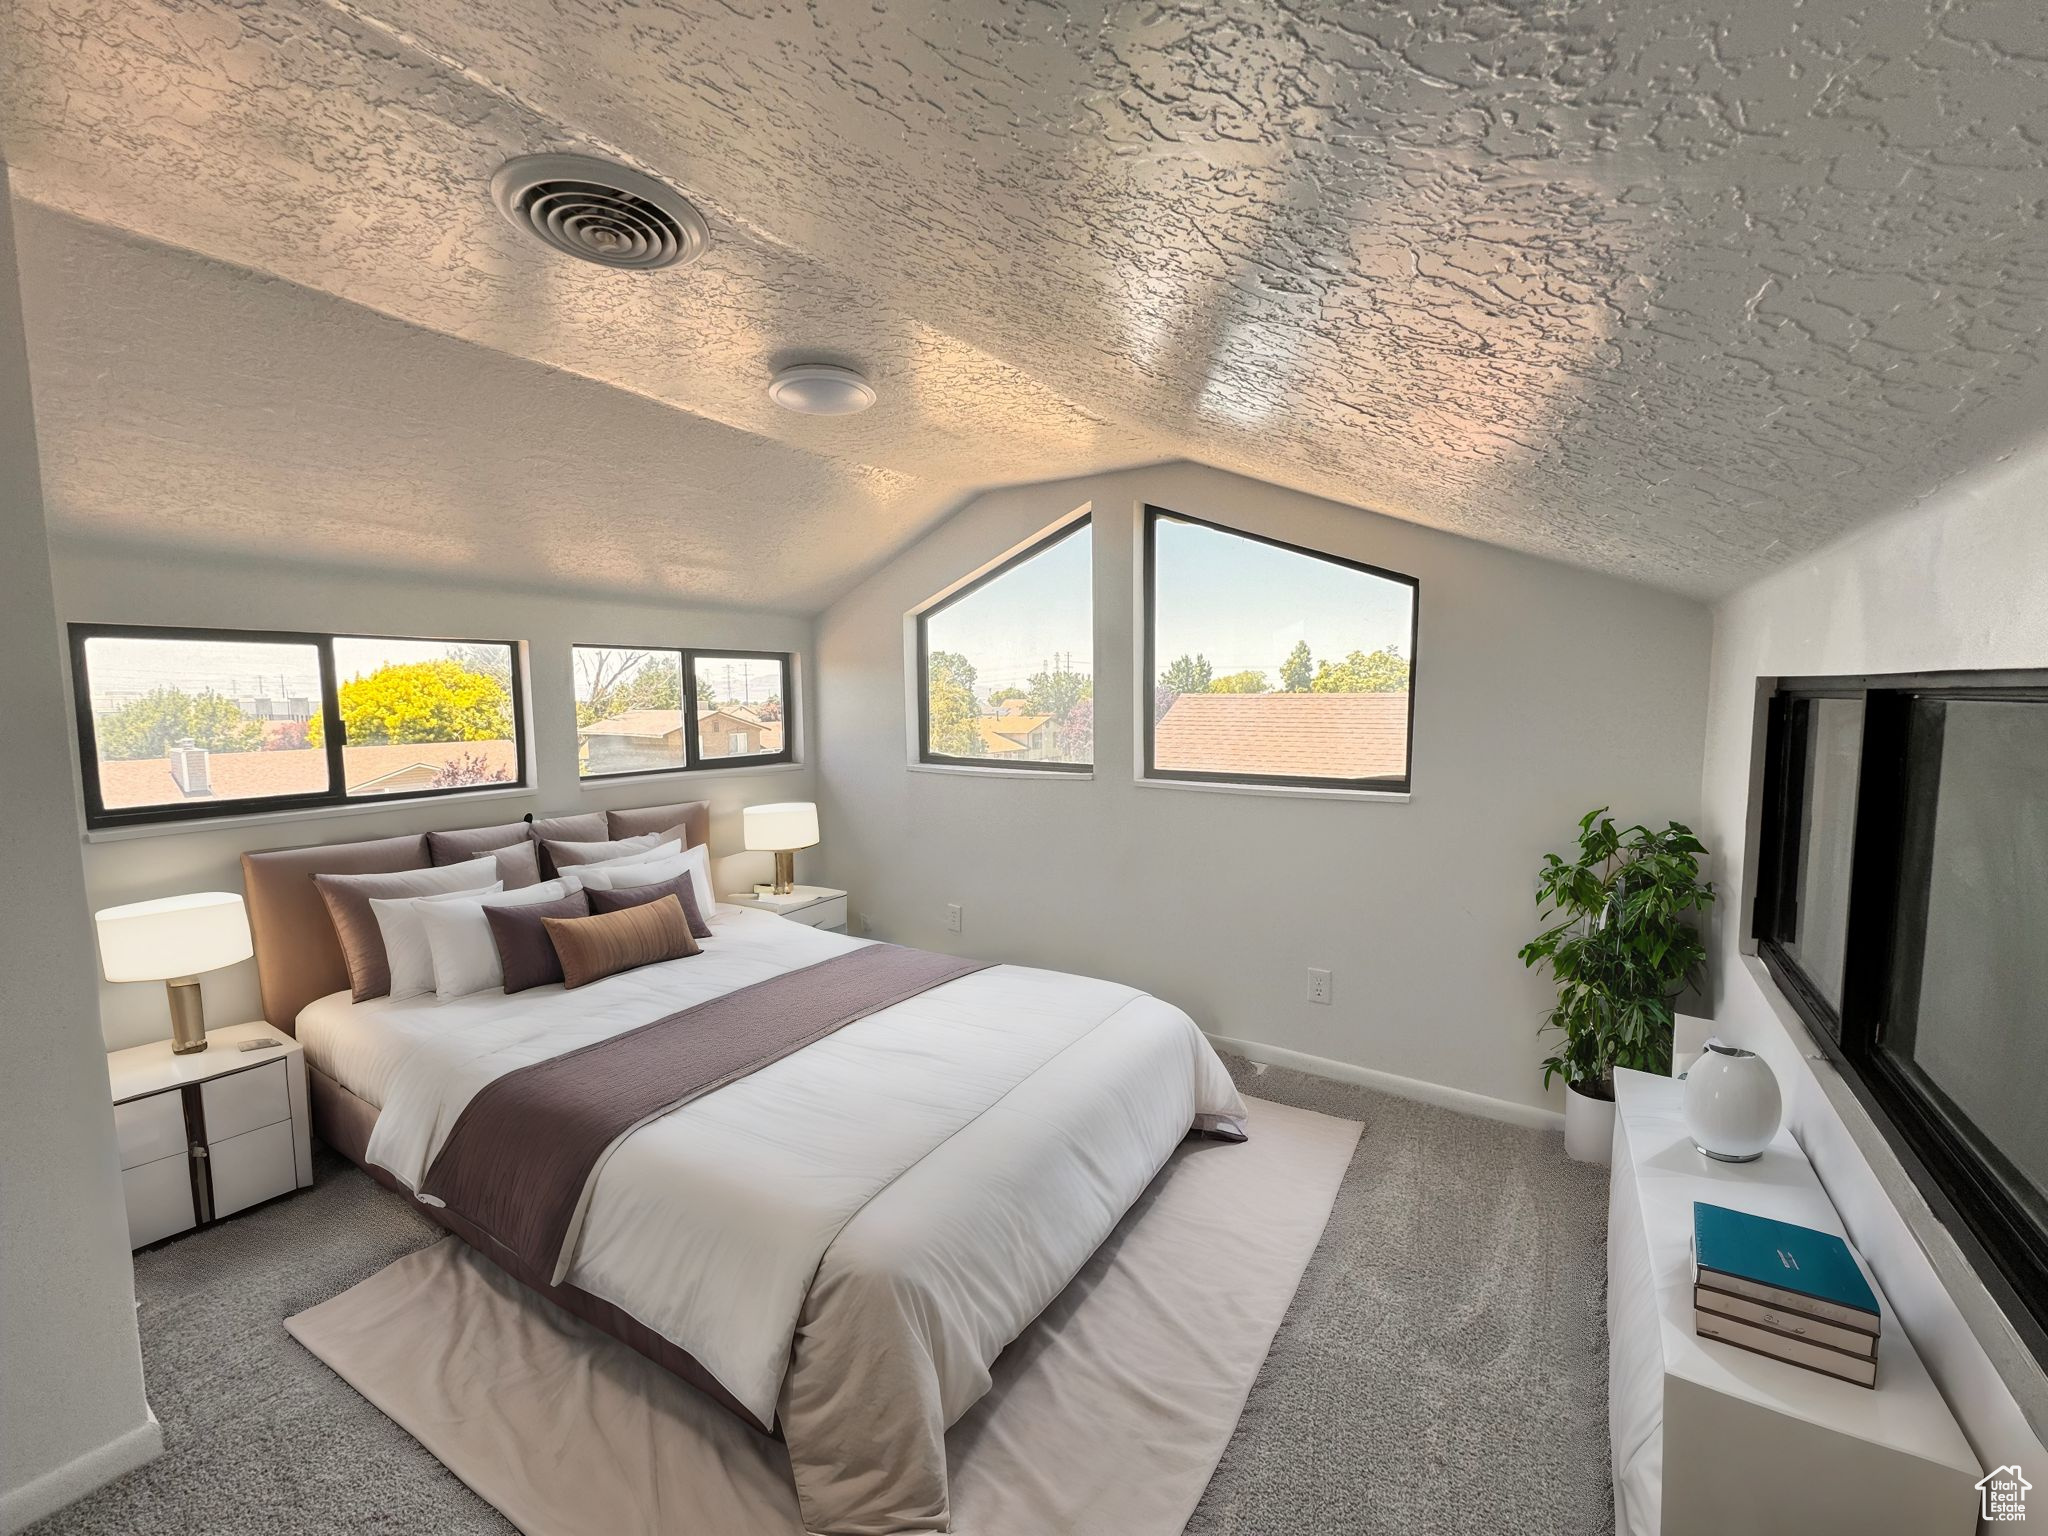 Bedroom with vaulted ceiling, carpet, and a textured ceiling